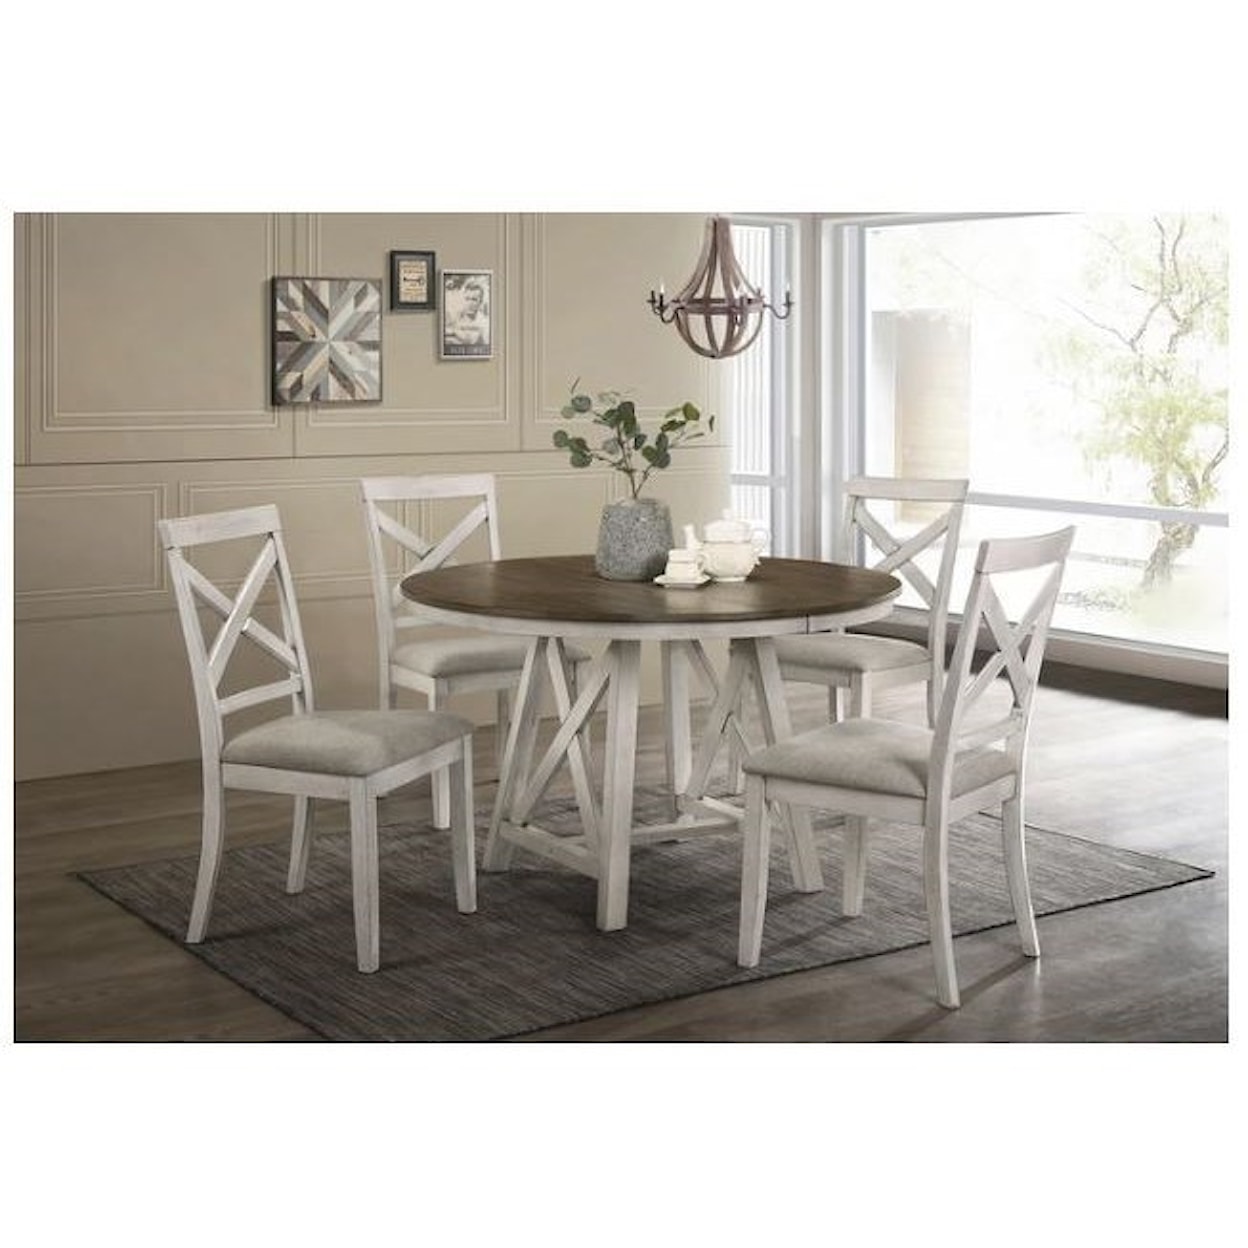 New Classic SOMERSET 5-Piece Table and Chair Set